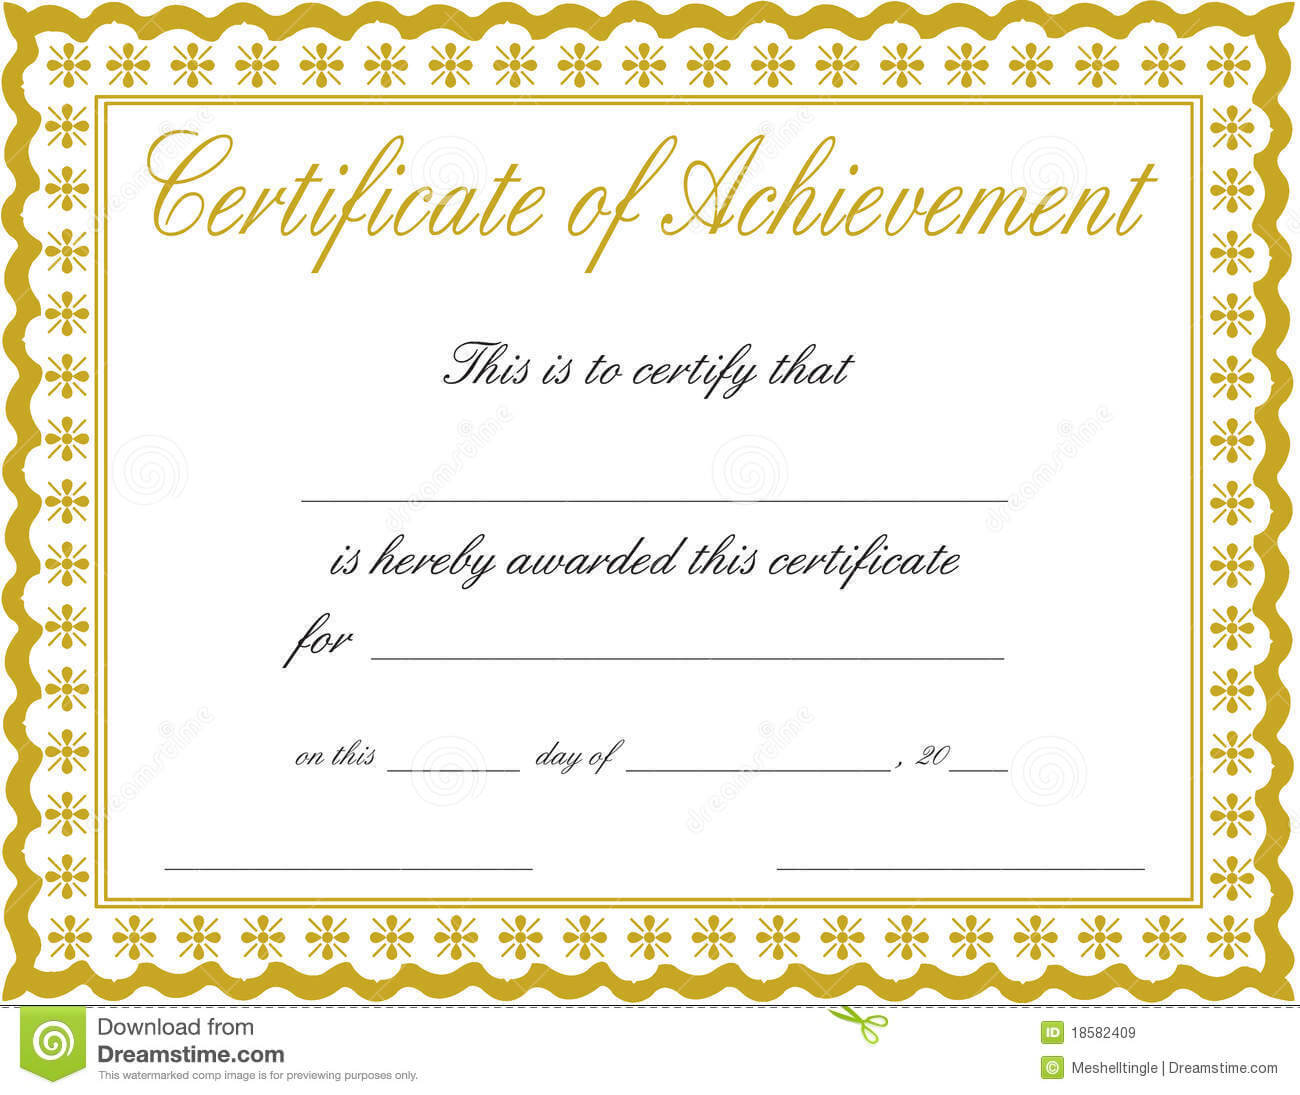 Certificate Of Achievement Stock Image. Image Of Colored With Regard To Certificate Of Accomplishment Template Free